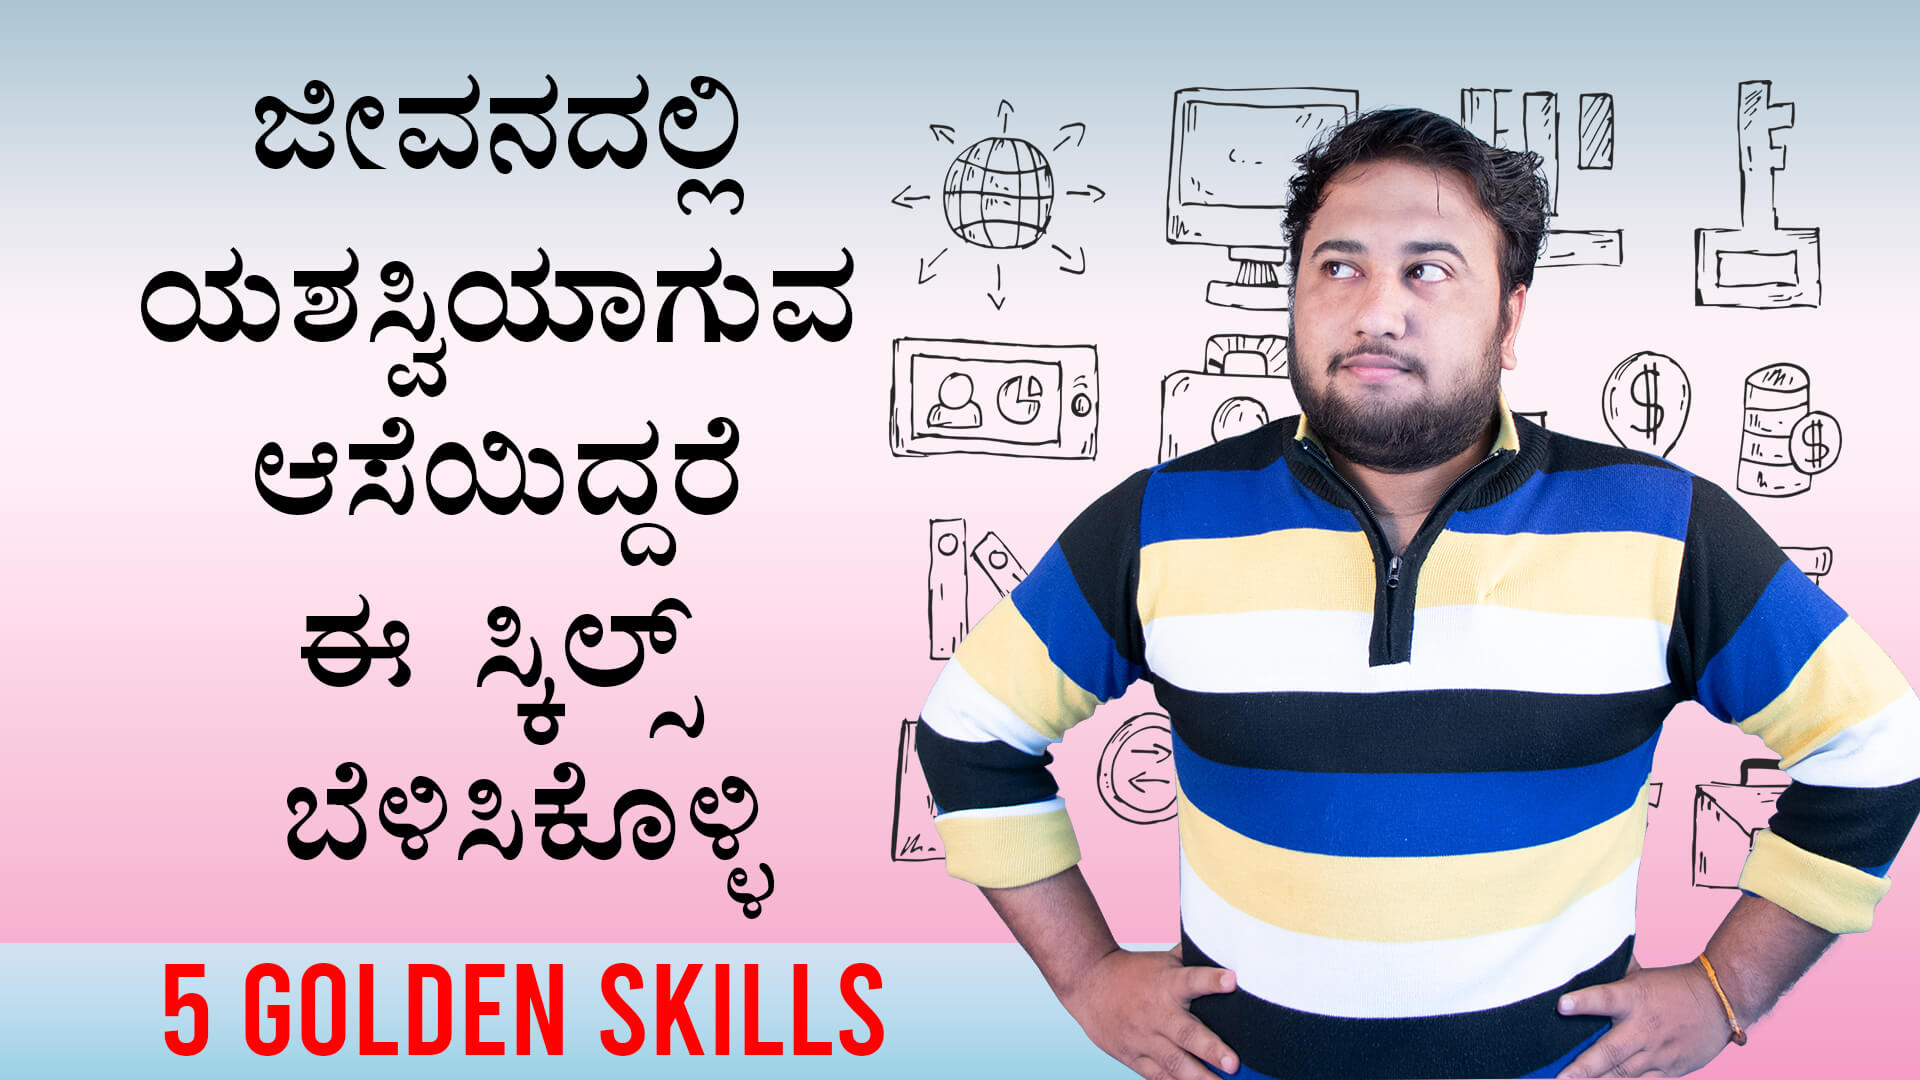 You are currently viewing 5 ಗೋಲ್ಡನ್ ಸ್ಕಿಲಗಳು – 5 Golden Skills – Top 5 Skills to Grow in your Job and Business in Kannada